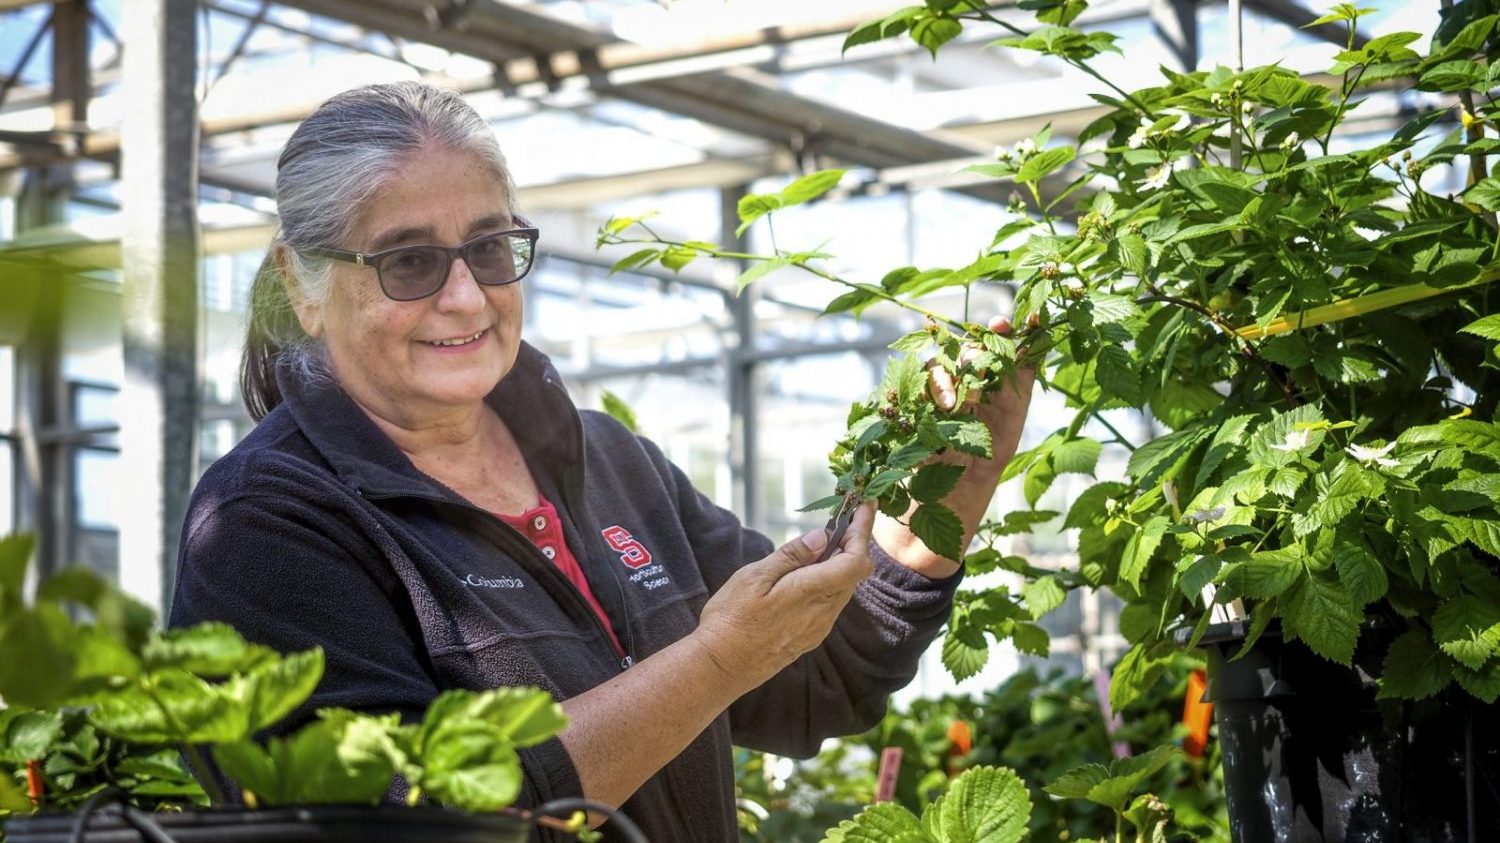 Gina Fernandez among berry plants in a green house